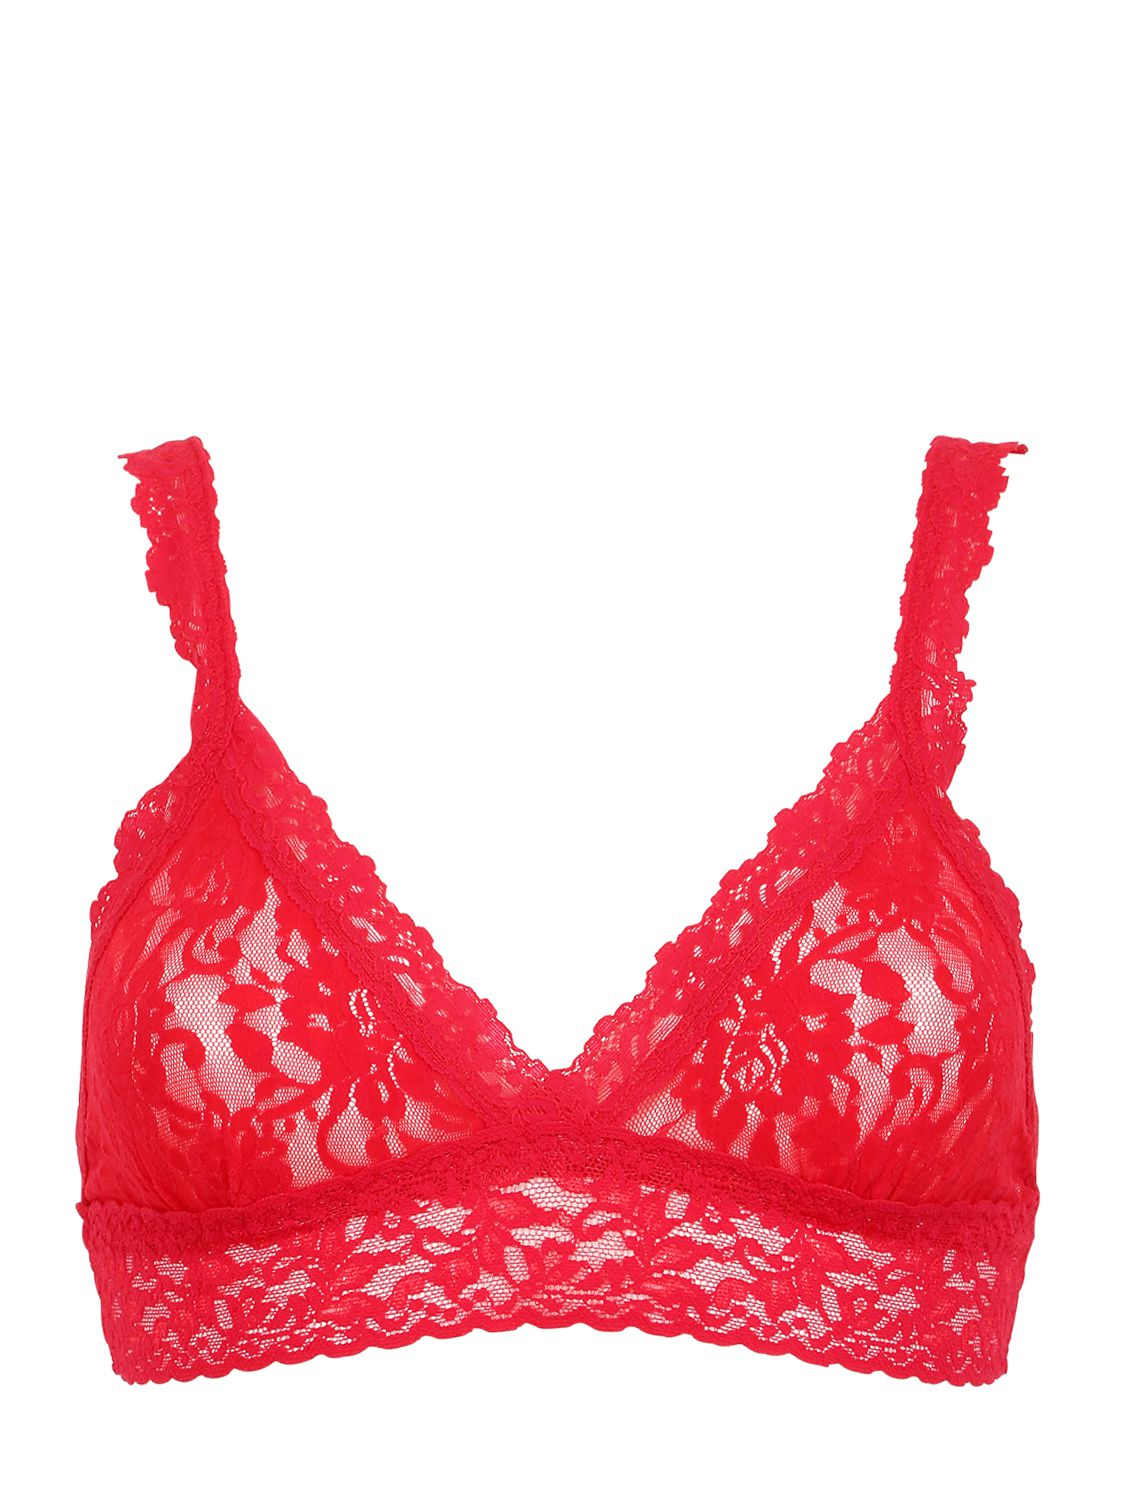 Lyst - Hanky Panky Soft Lace Bra in Red - Save 24%